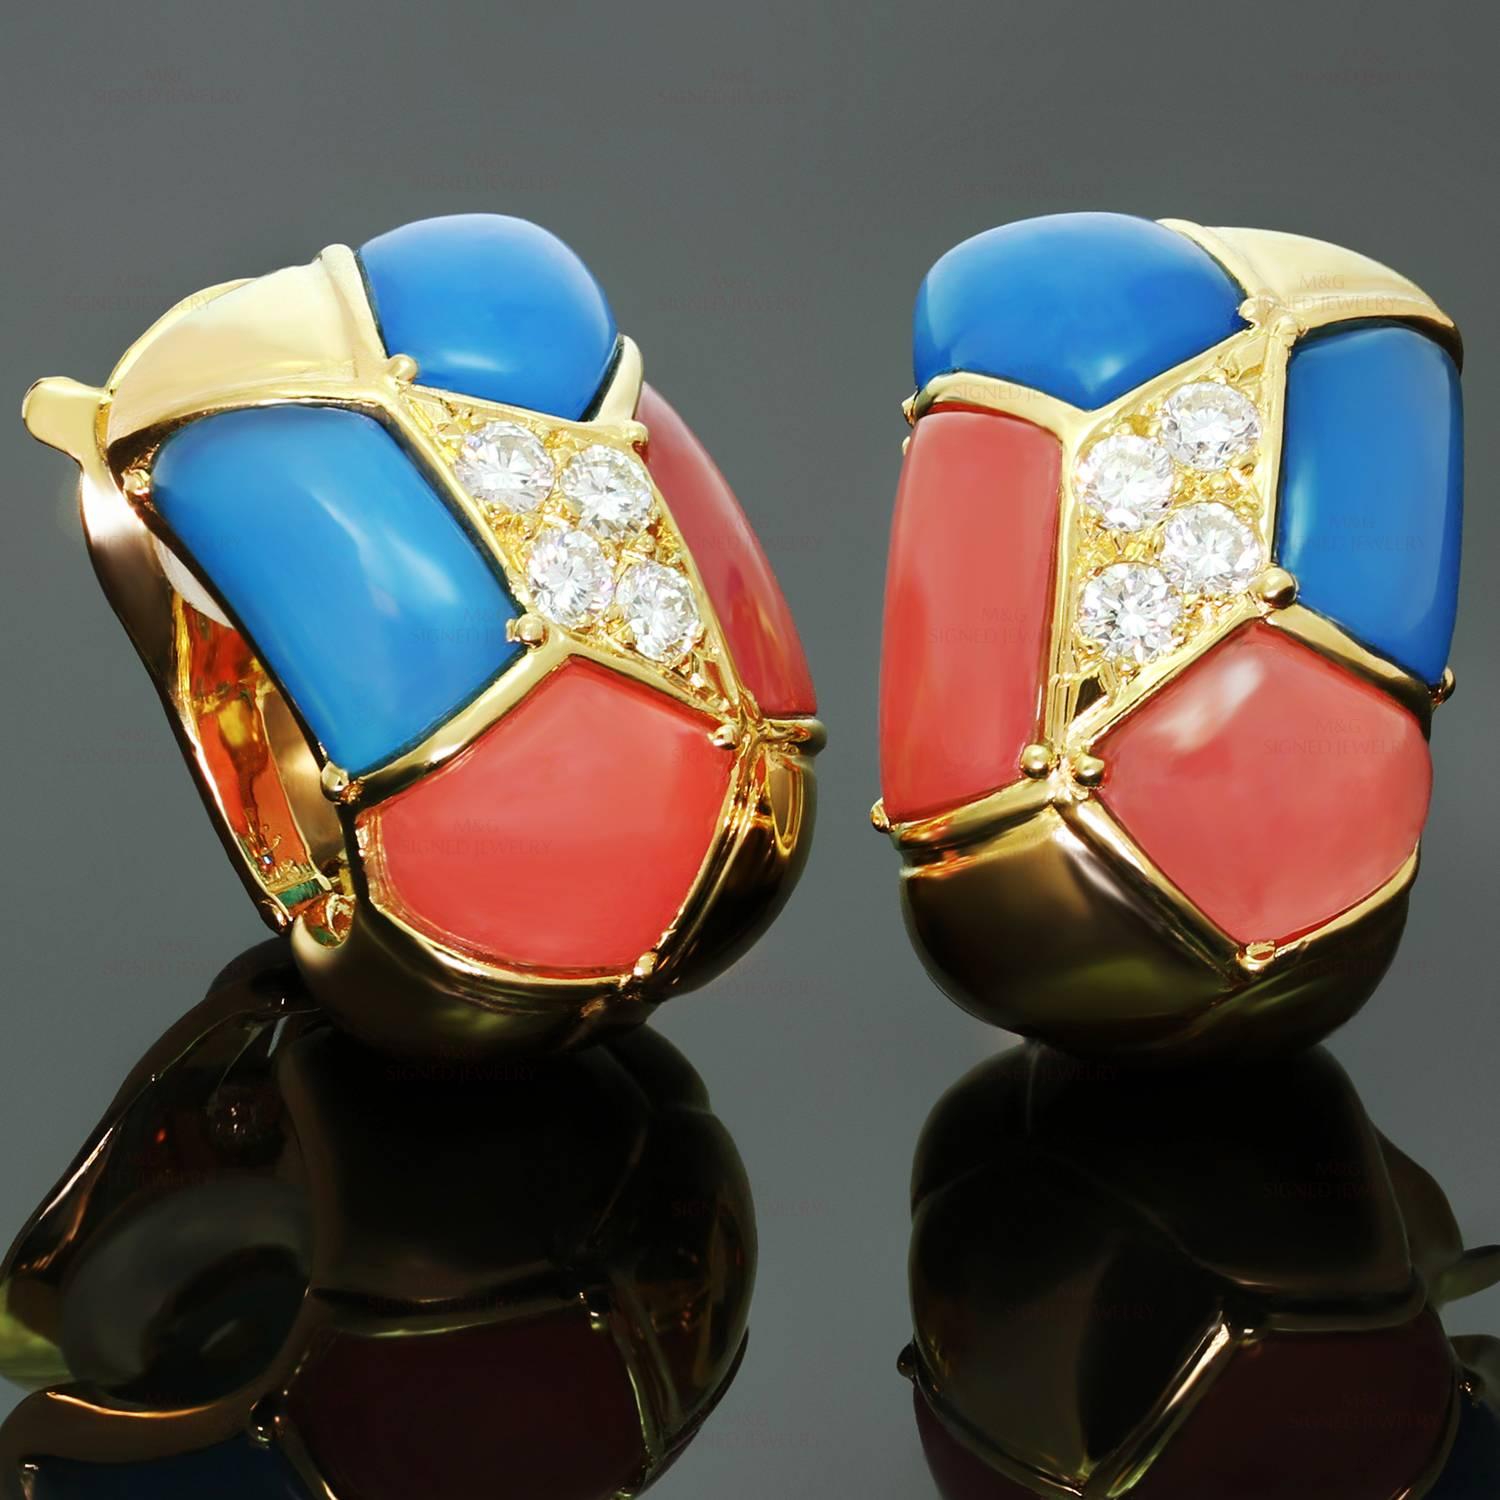 These gorgeous clip-on earrings from Van Cleef & Arpels are crafted in 18k yellow gold and set with natural blue and pink agate stones and brilliant-cut diamonds of an estimated 0.65 carats. Made in France circa 1990s. Measurements: 0.59"